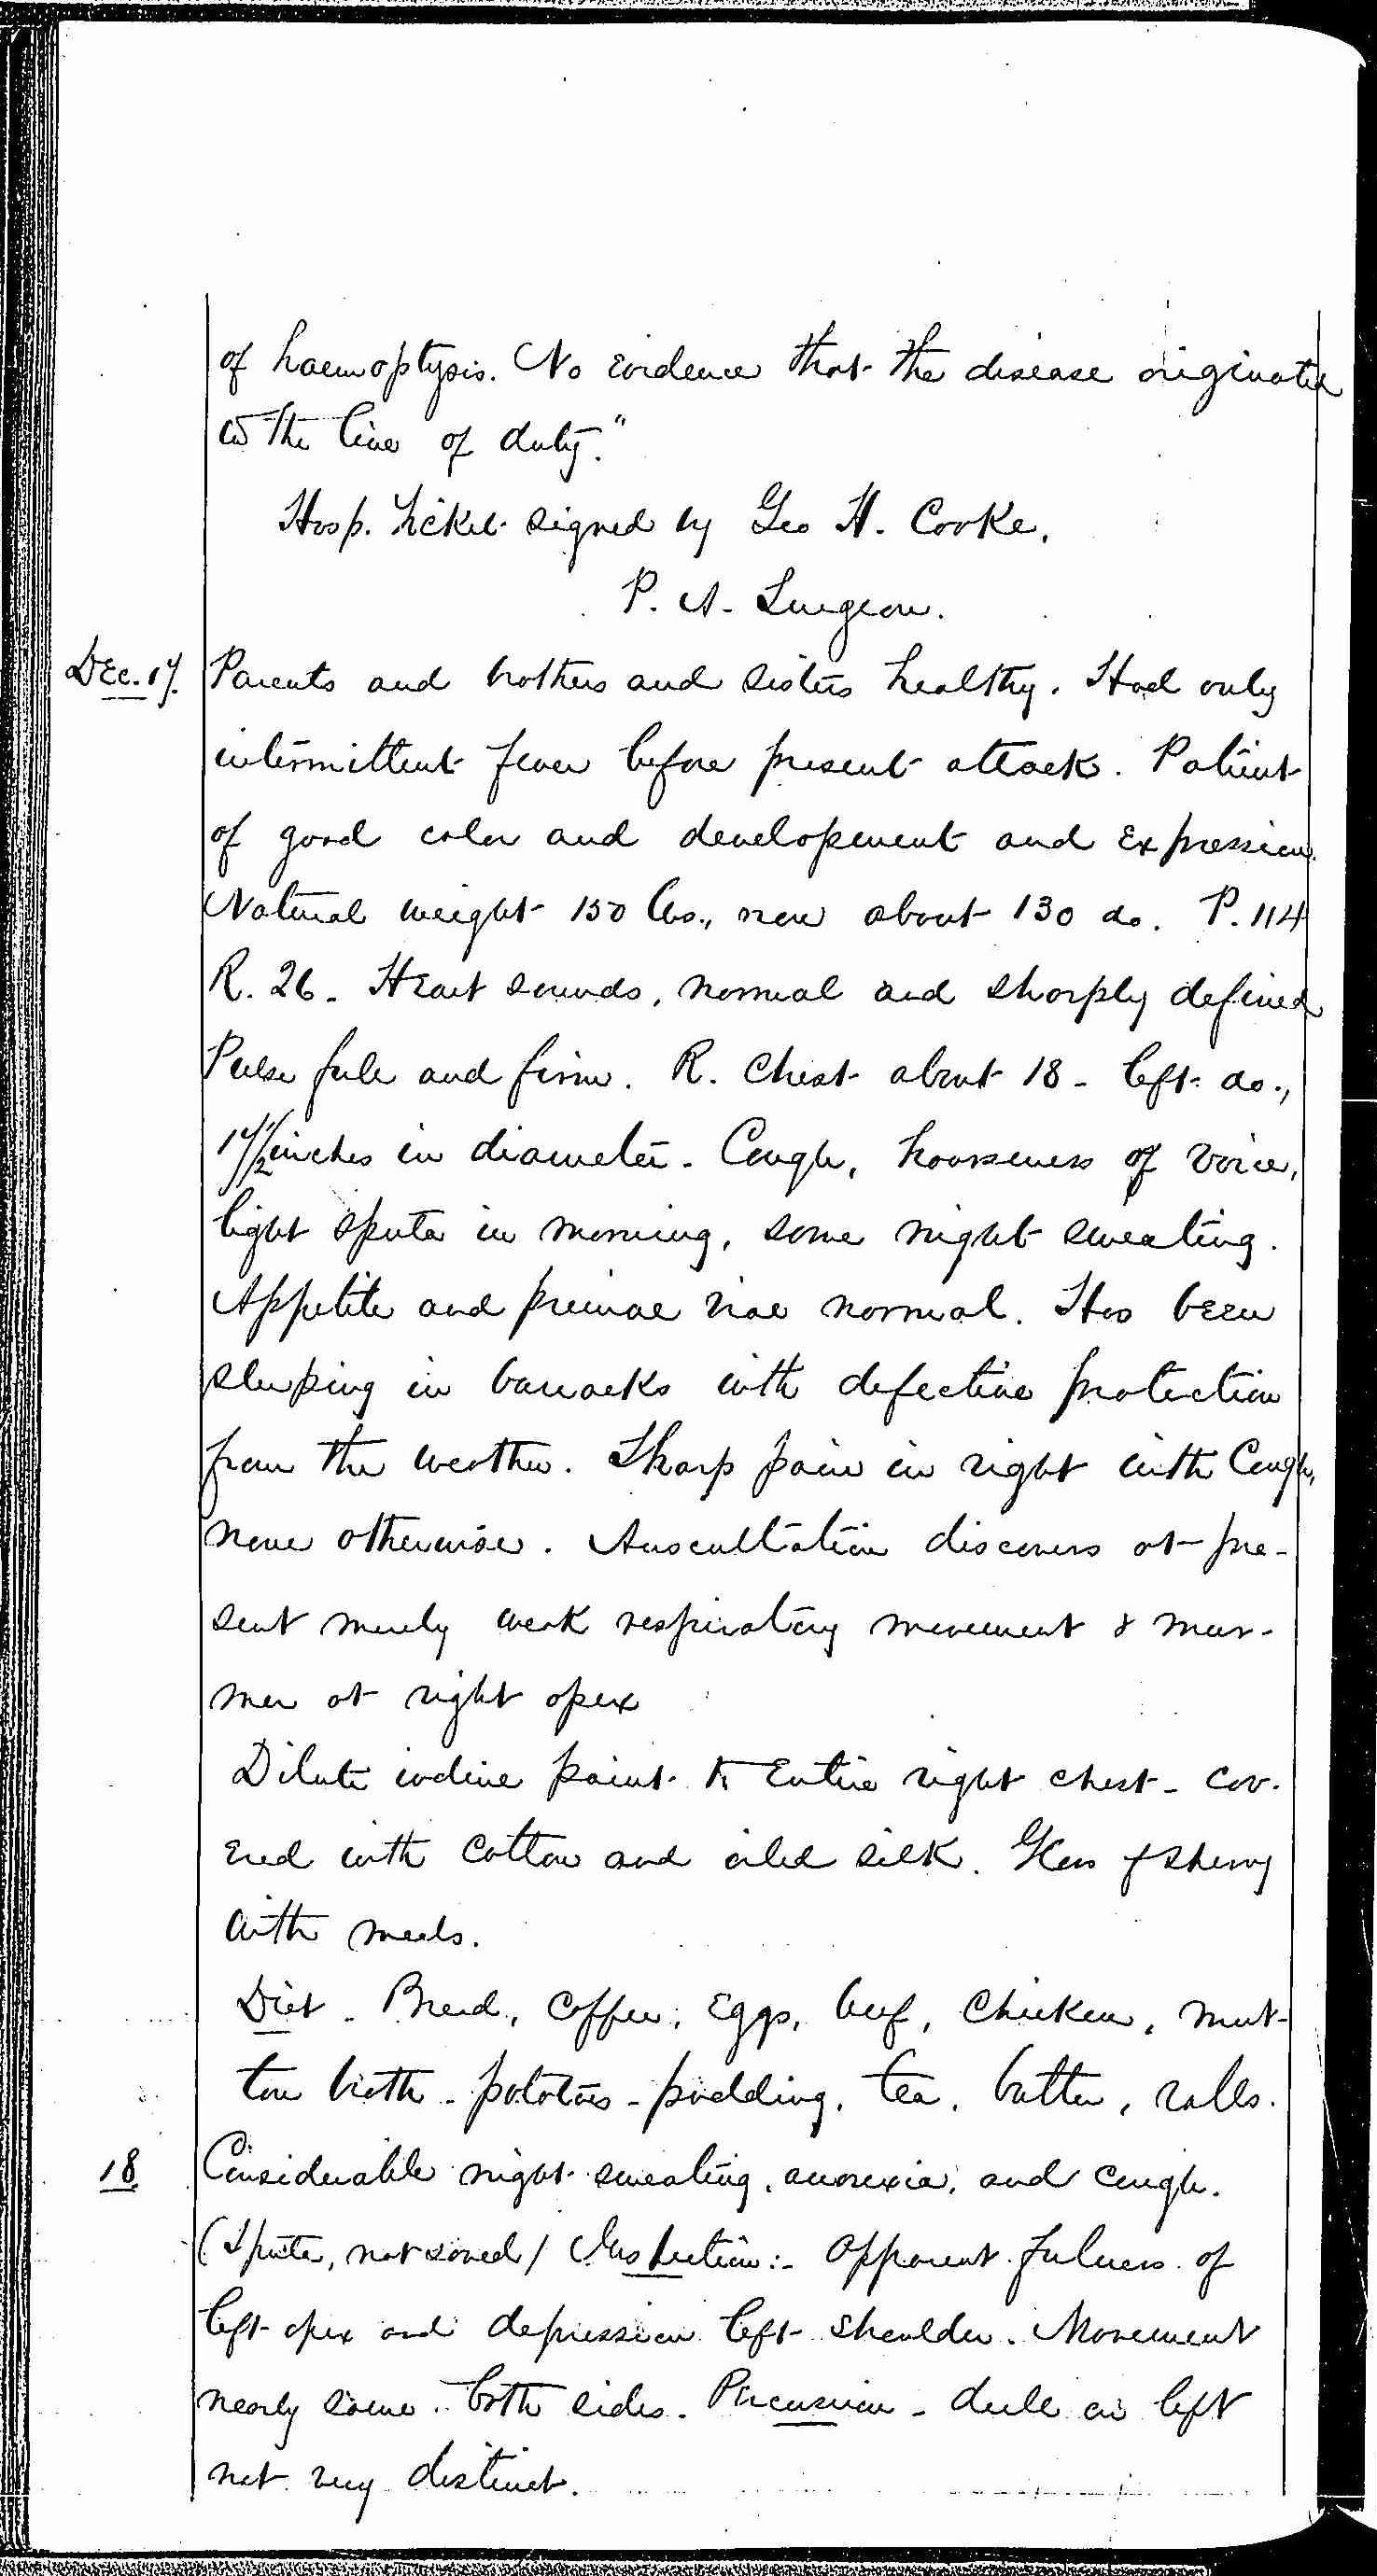 Entry for Peter C. Cheeks (page 2 of 16) in the log Hospital Tickets and Case Papers - Naval Hospital - Washington, D.C. - 1868-69